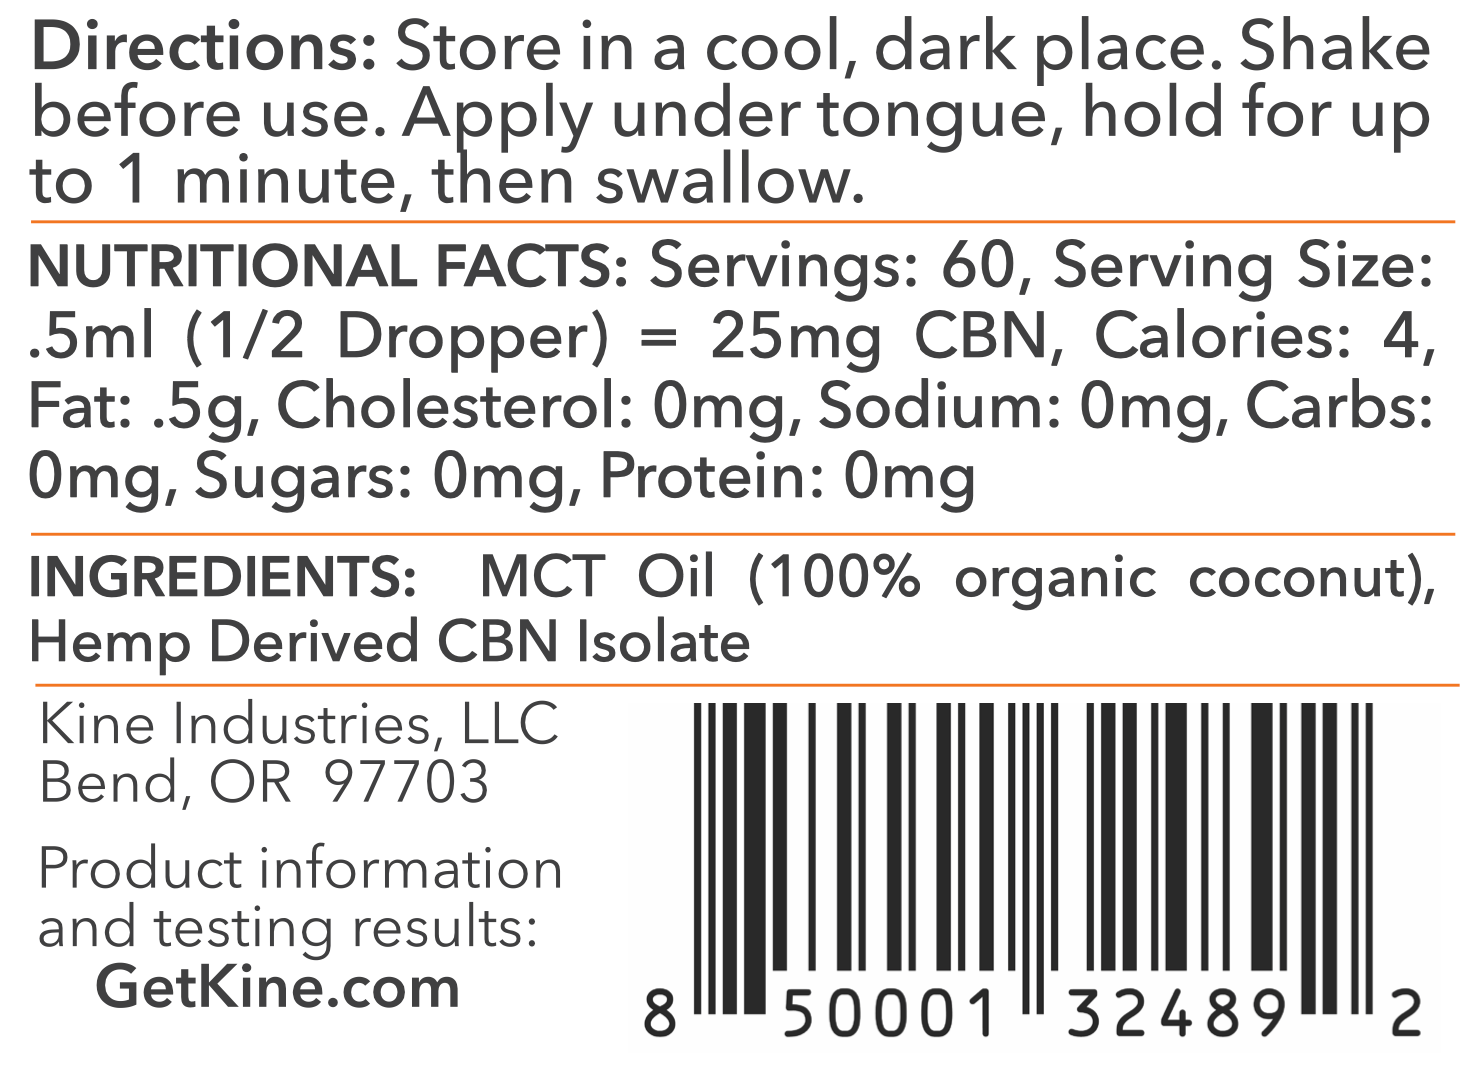 Kine Unflavored Neutral Organic CBN 1500mg tincture drops ingredients list and nutritional facts